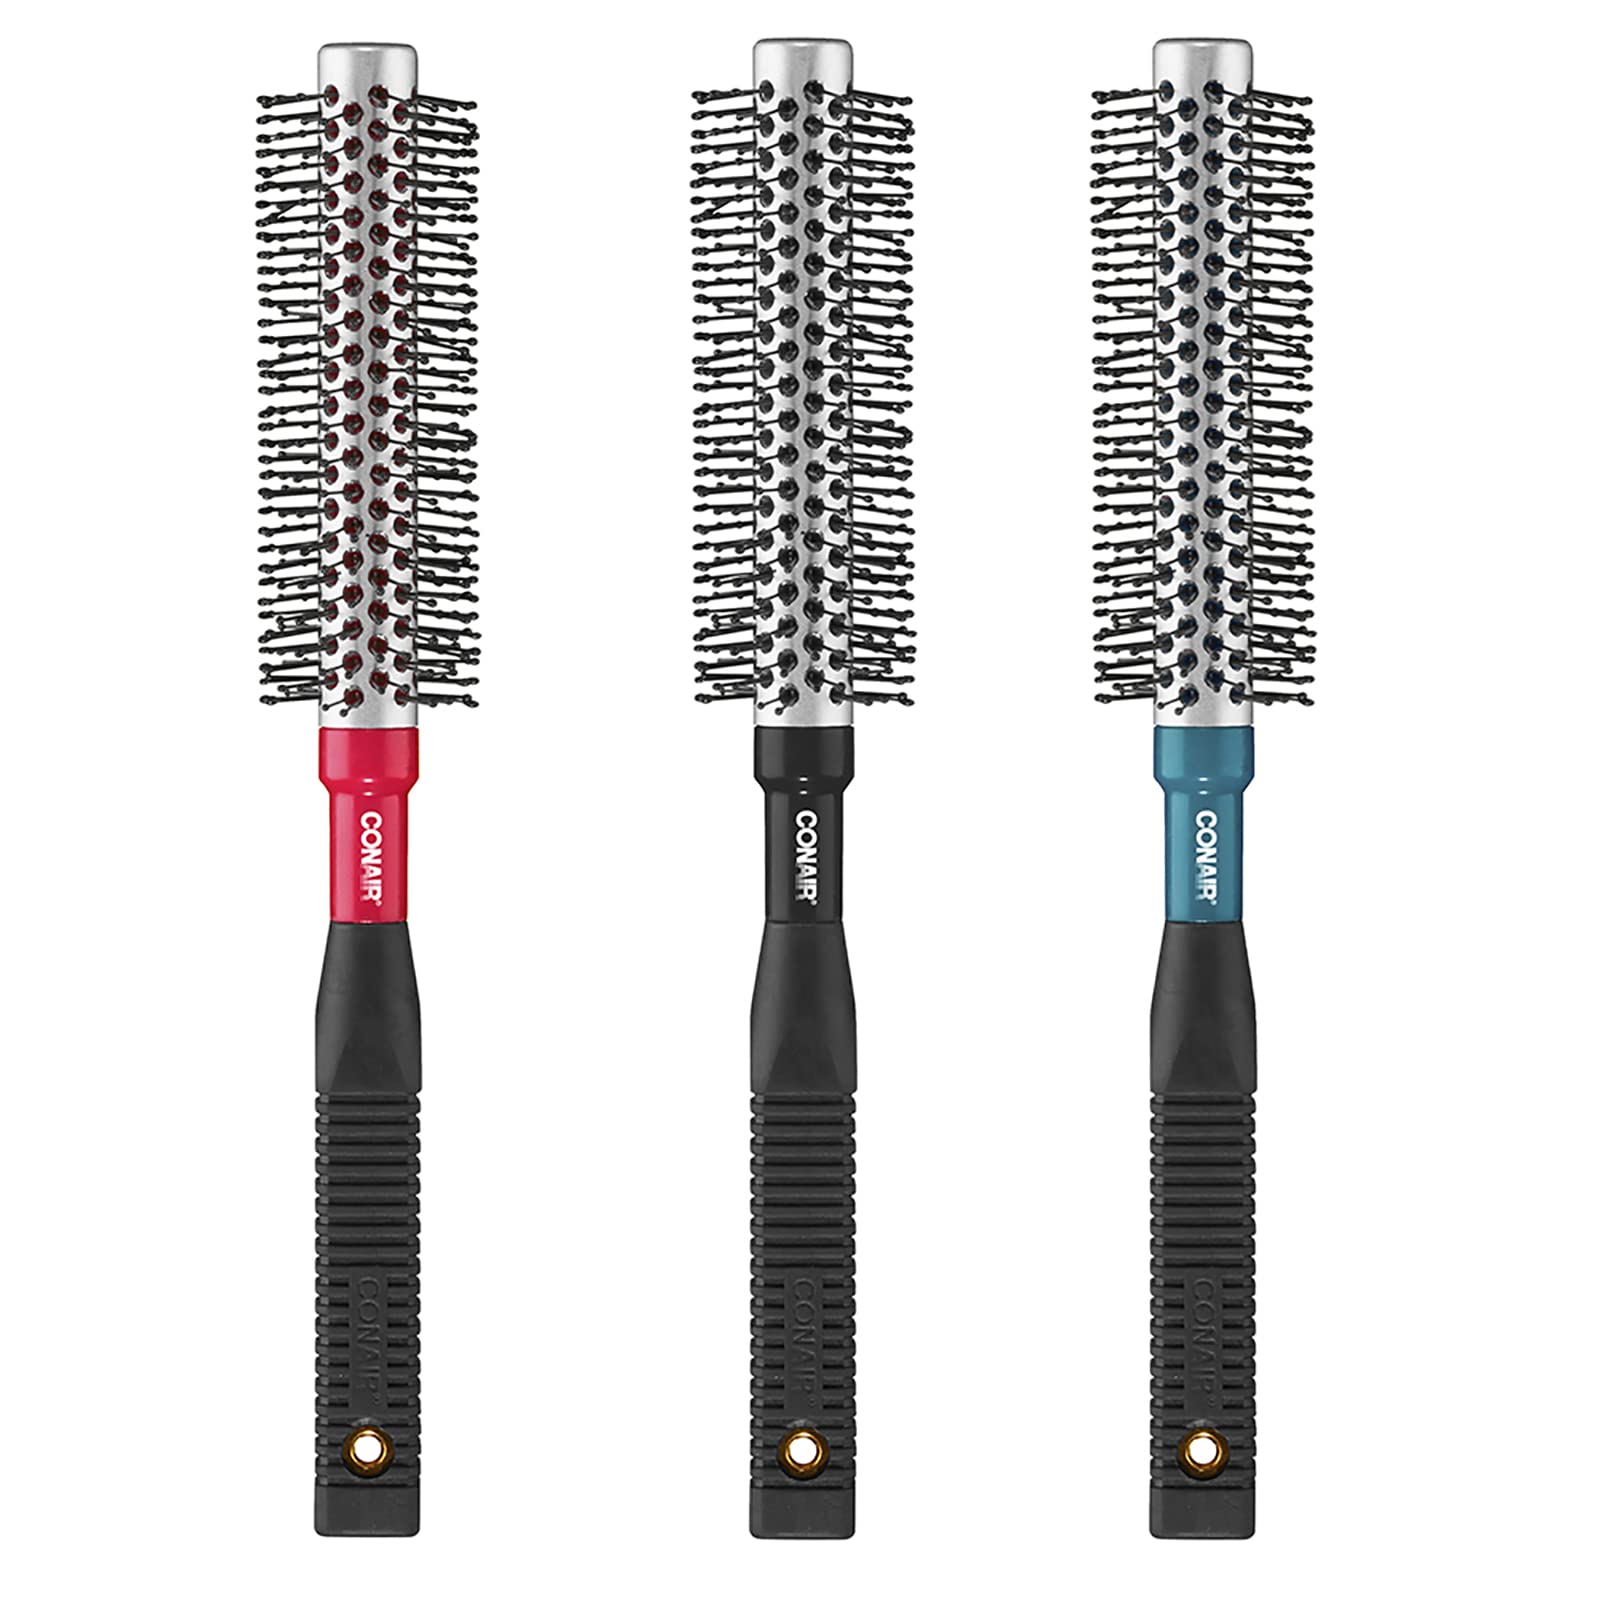 Conair Style & Volumize Metal Round Brush for Blow-Drying, Hairbrush for Short Hair Length, Color May Vary, 1 Count